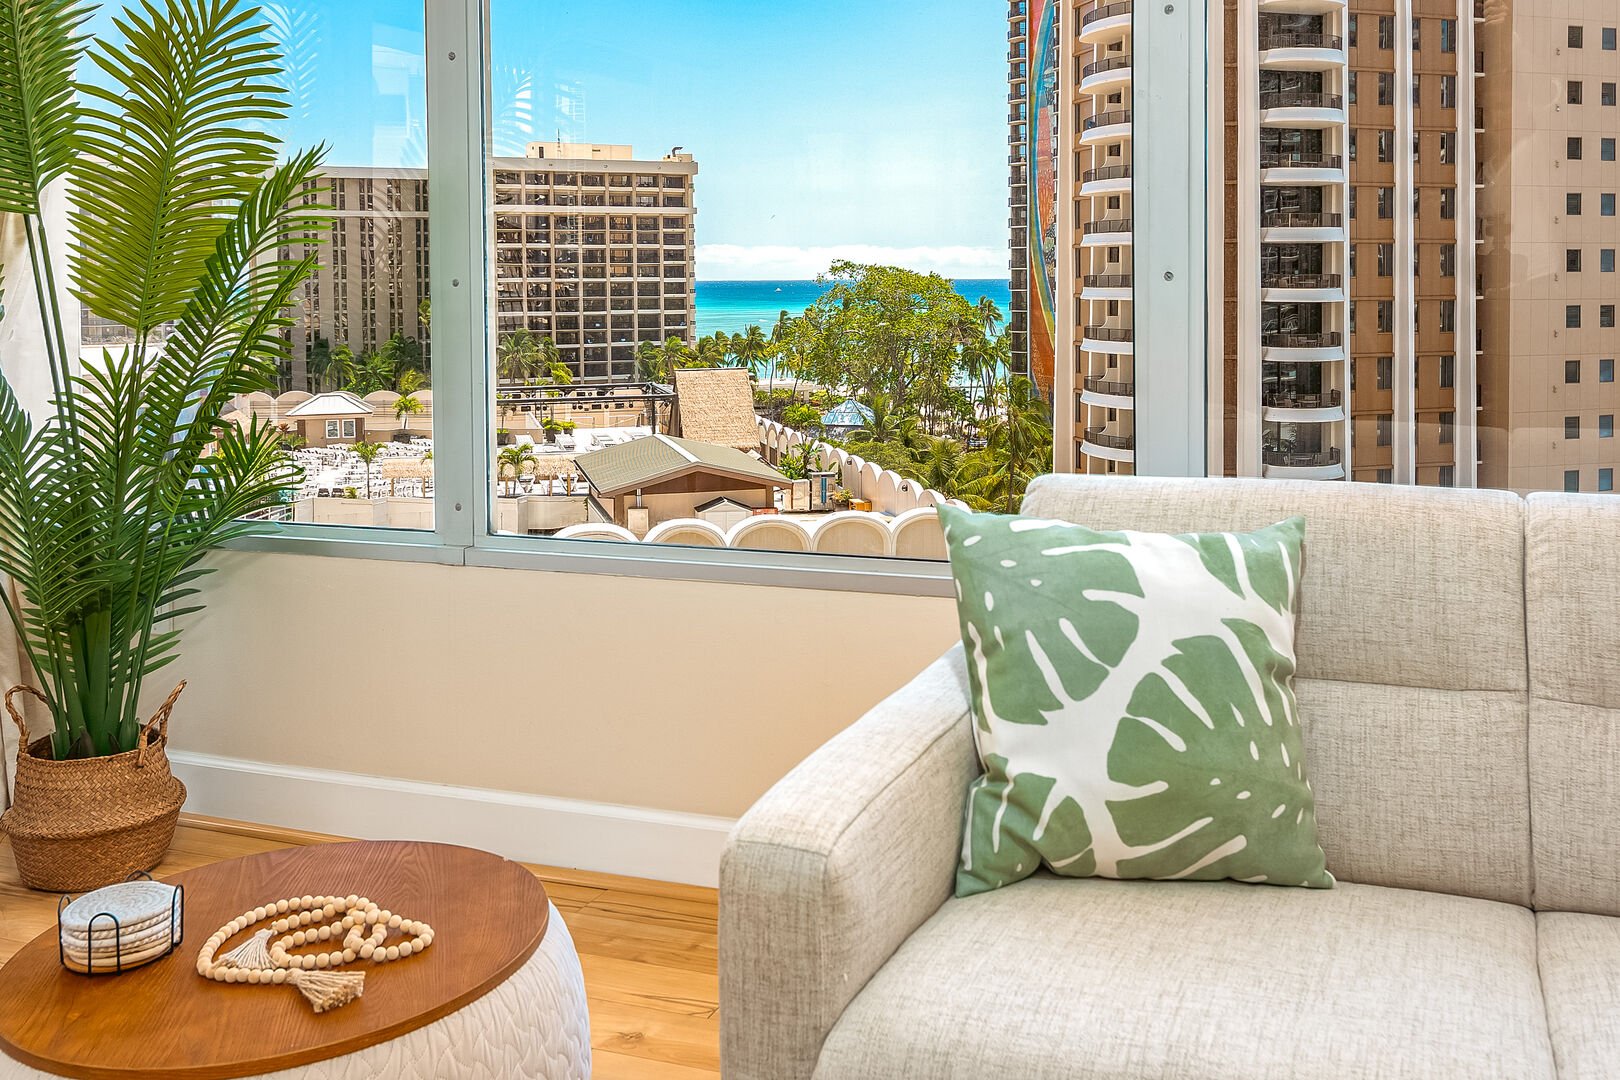 Enjoy the beautiful ocean view from your living room.